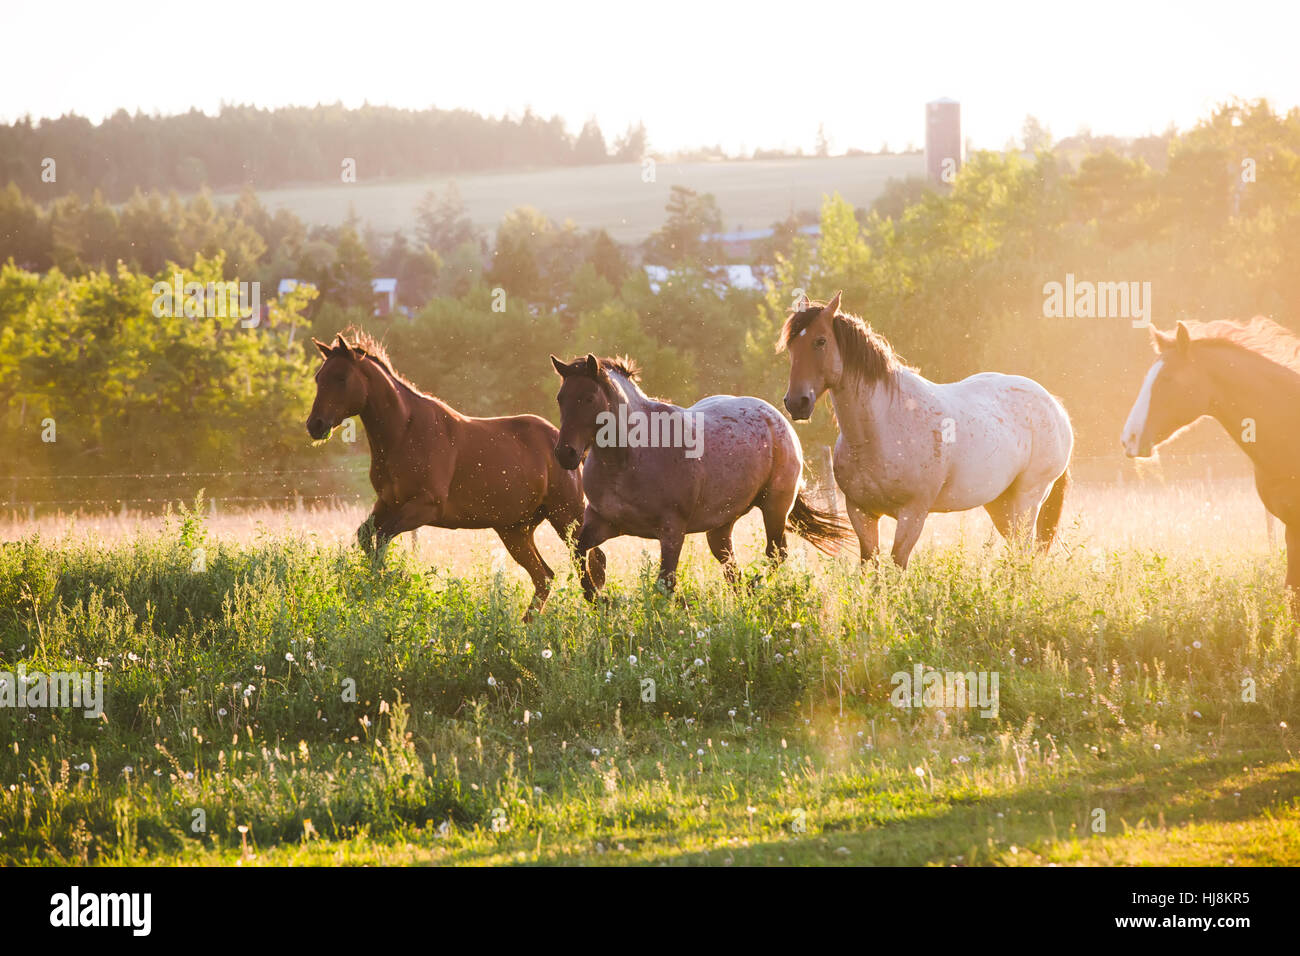 Four horses running in a field, British Columbia, Canada Stock Photo